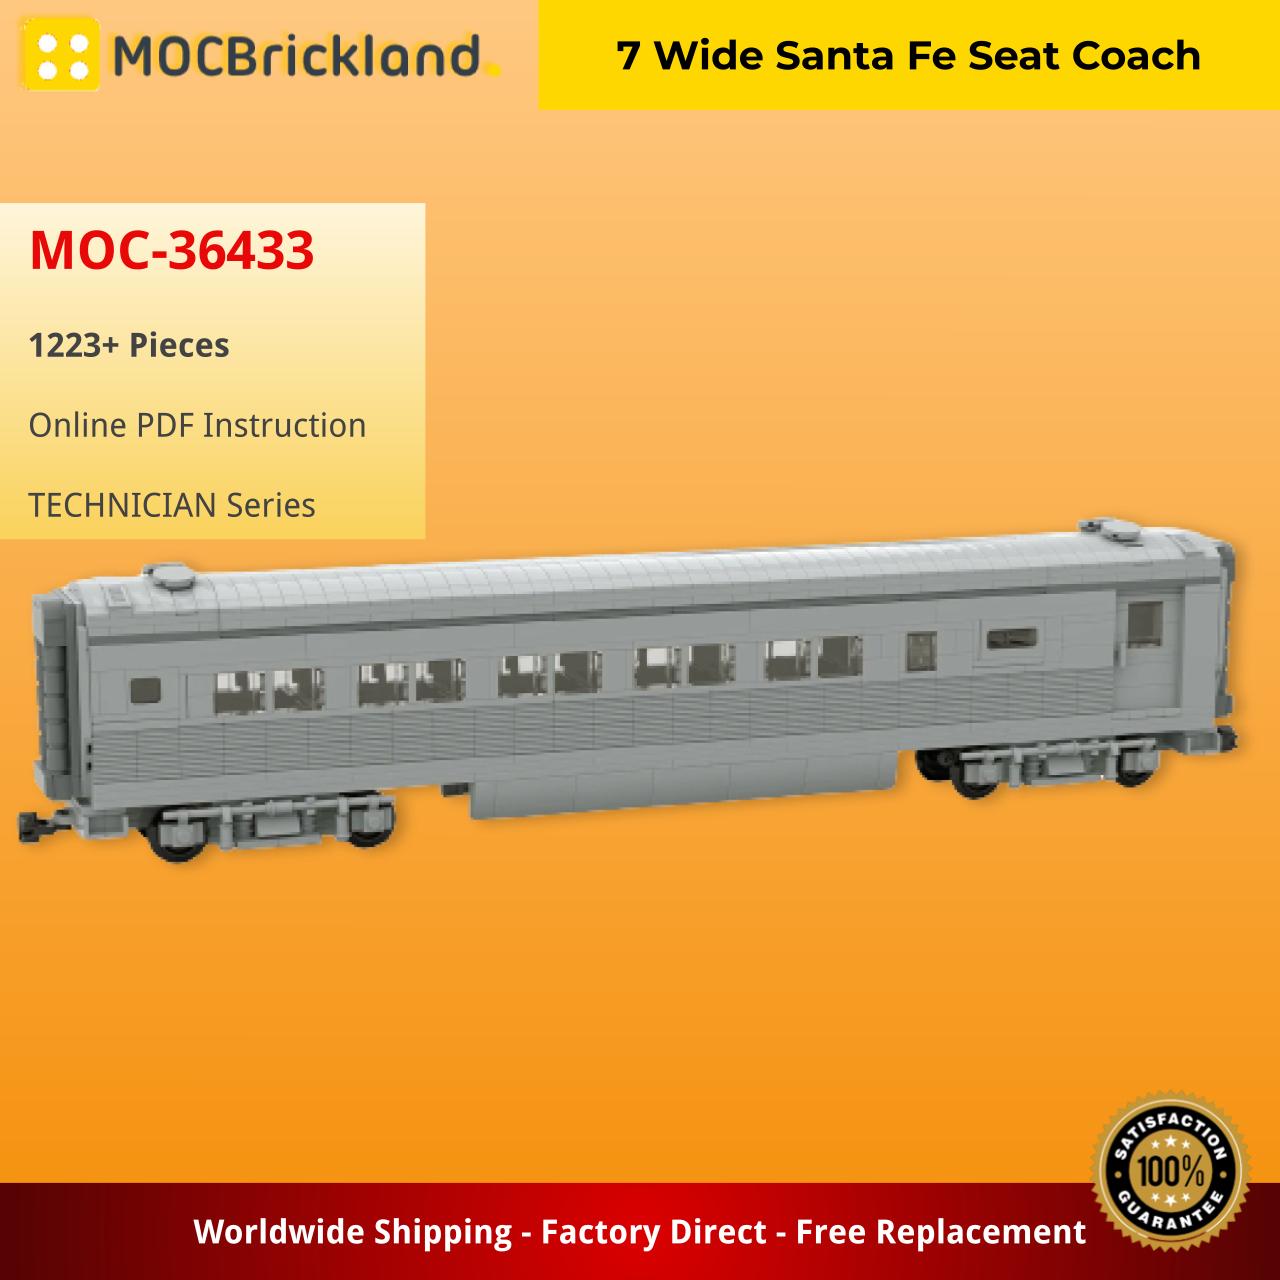 7 Wide Santa Fe Seat Coach TECHNICIAN MOC-36433 by Barduck WITH 1223 PIECES